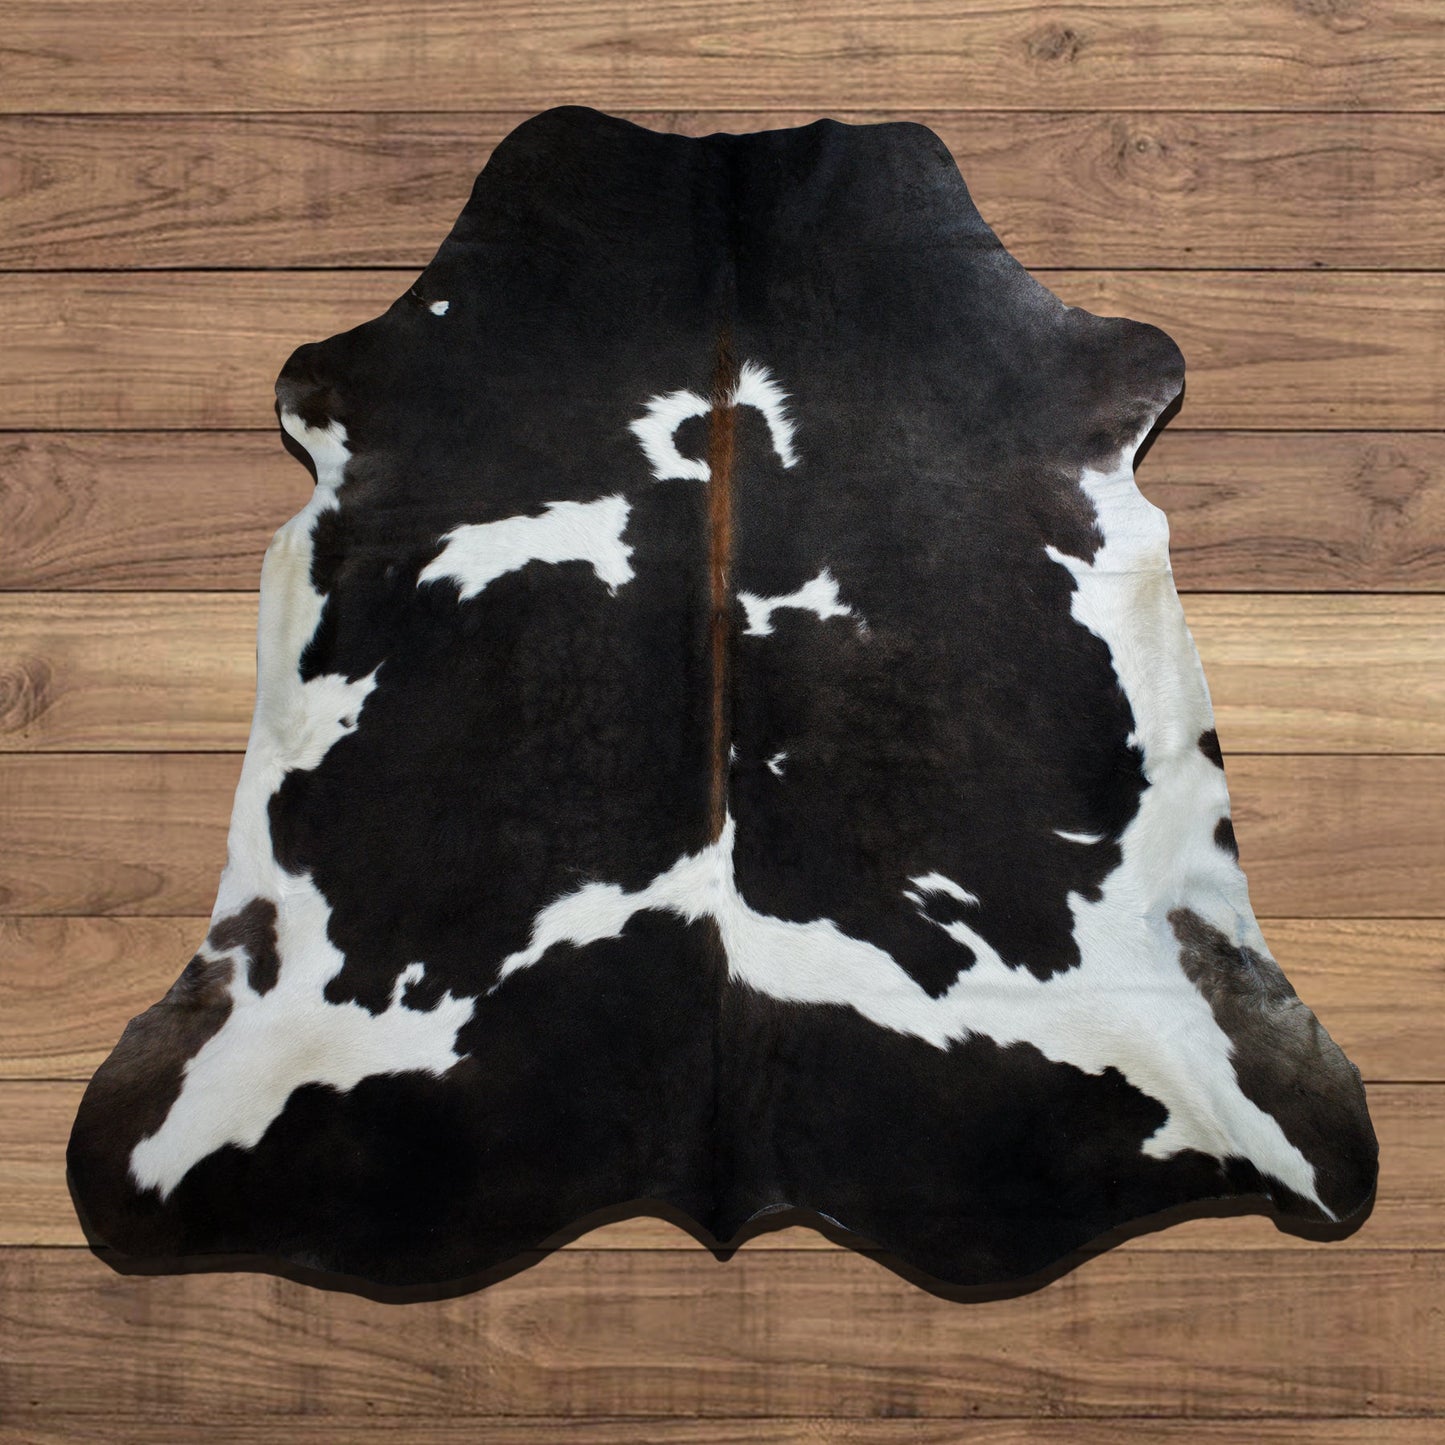 Extra Large RODEO charcoal and white cowhide rug 6.7 x 7.4 ft-- -4385 - Rodeo Cowhide Rugs